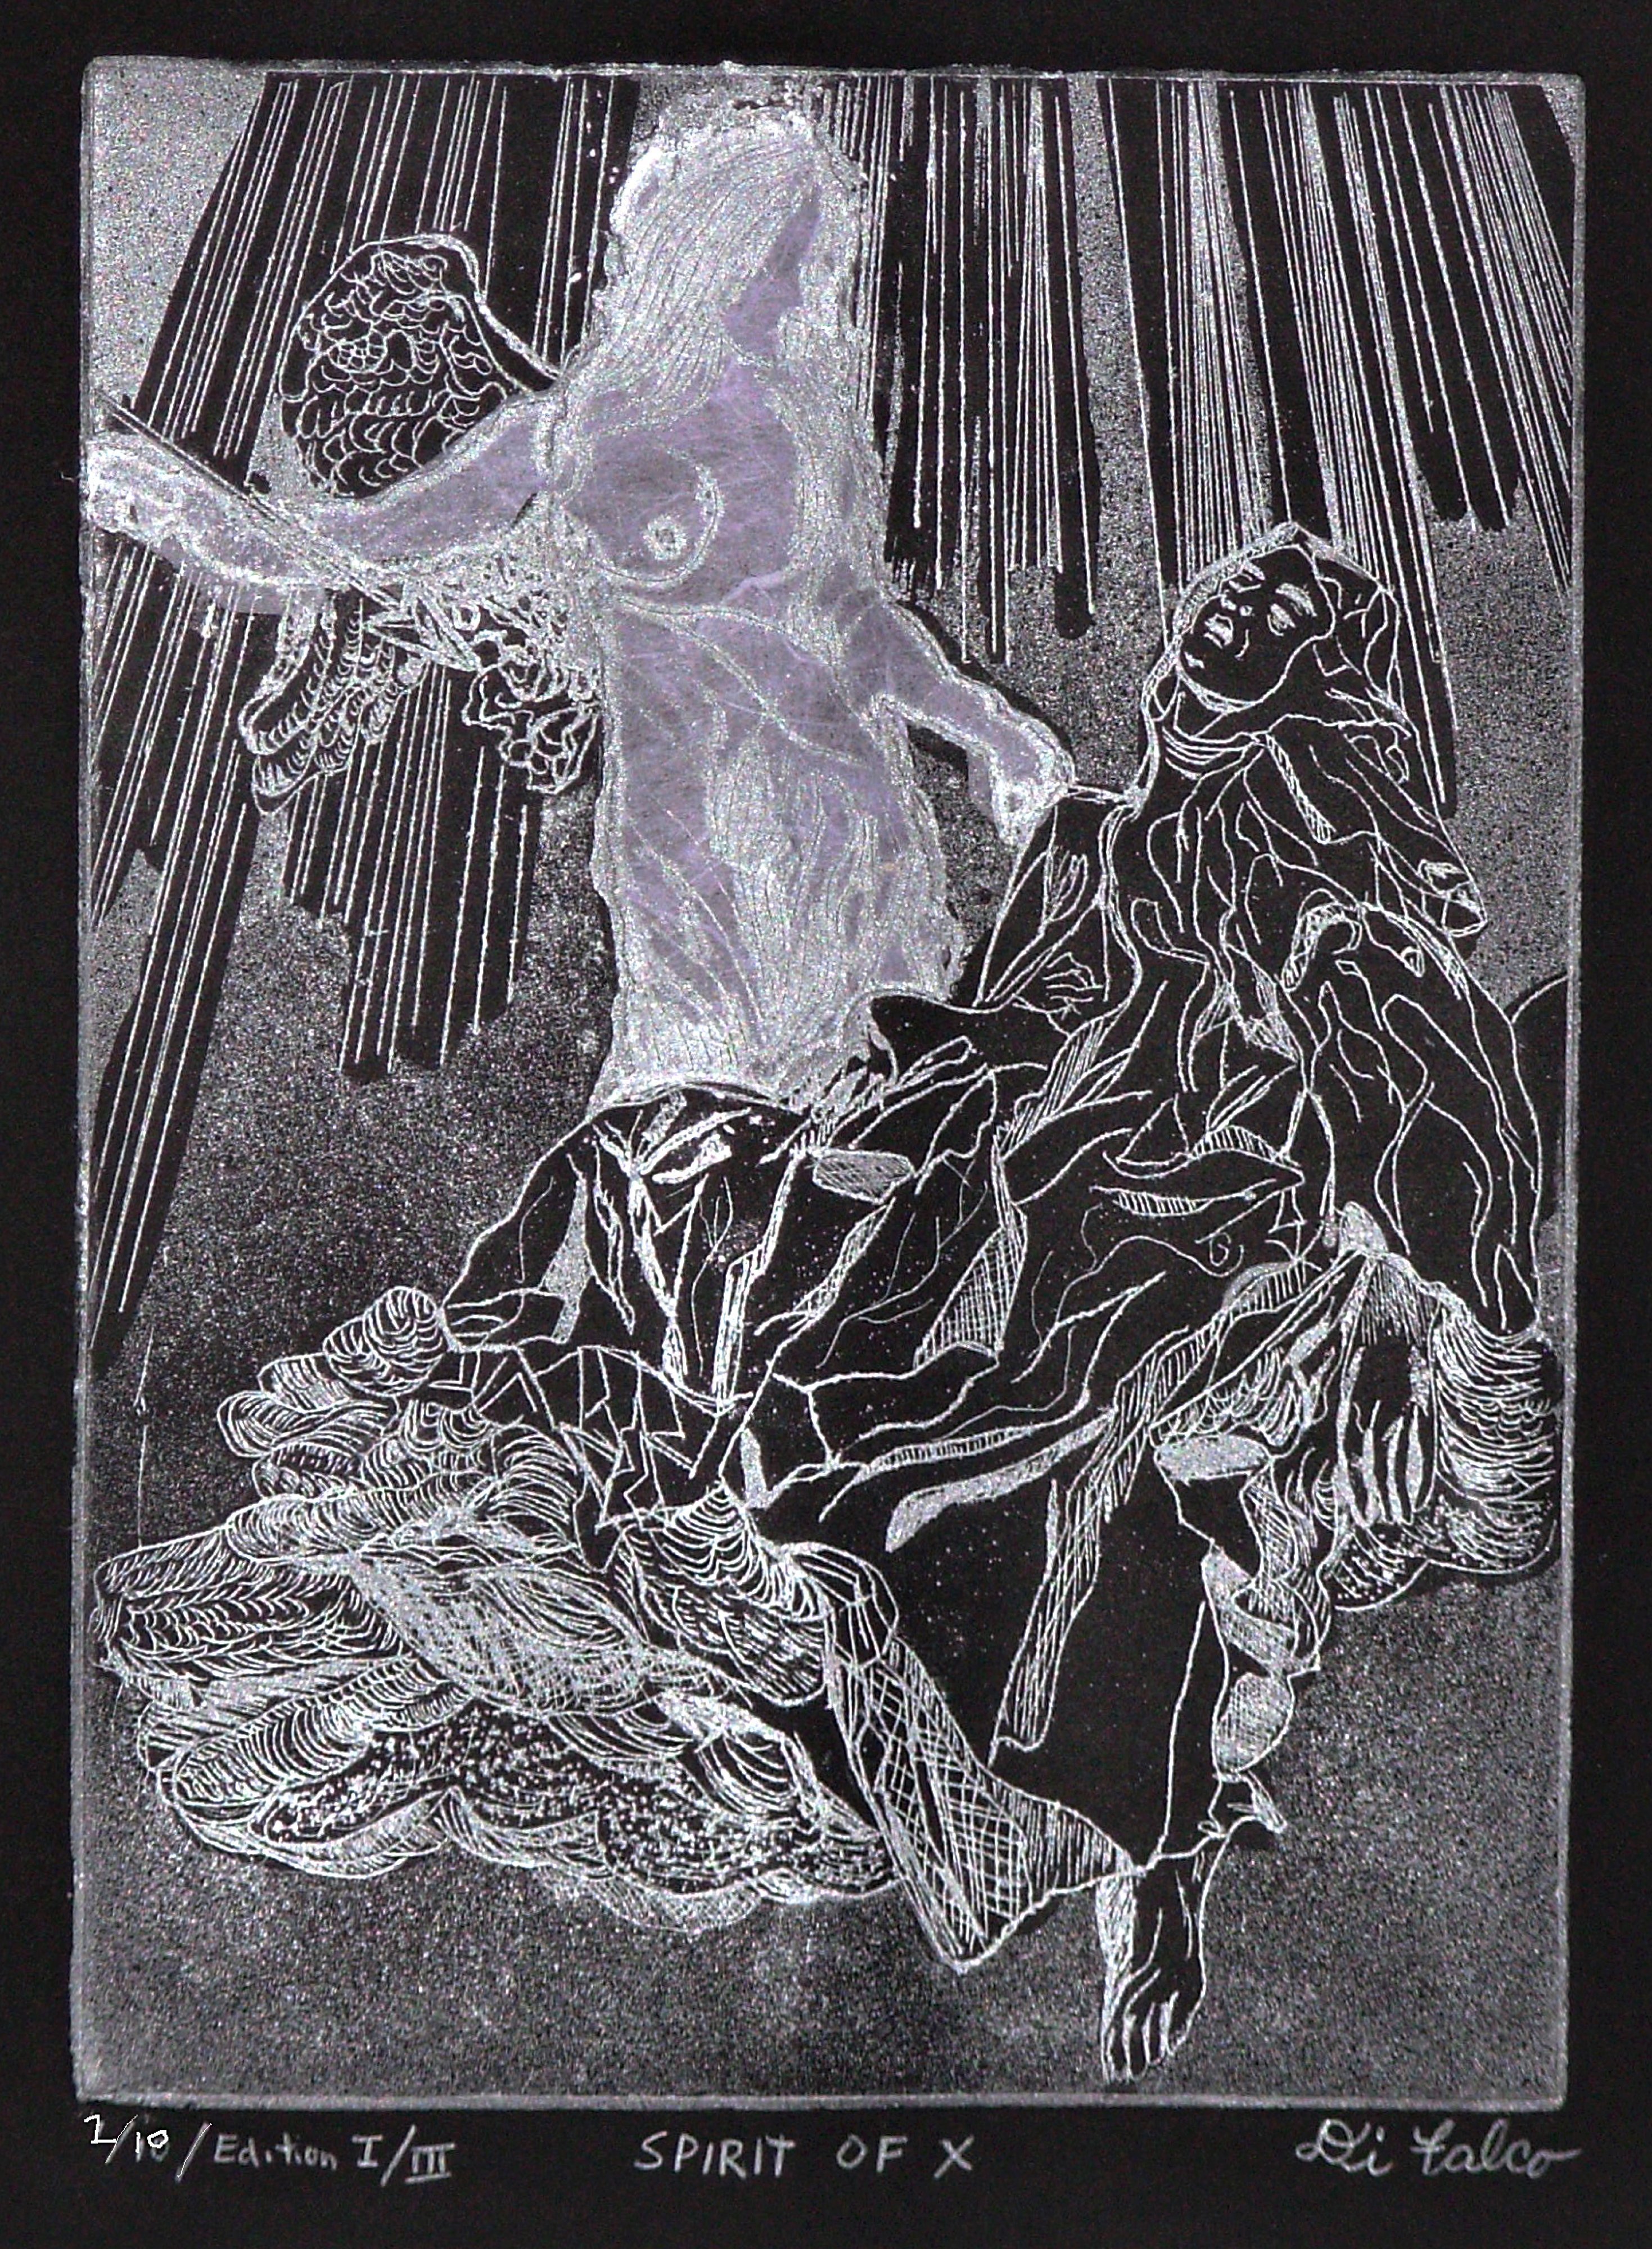 Jerry  Di Falco, 'SPIRIT OF X', 2012, original Printmaking Etching, 11 x 15  x 0.5 inches. Artwork description: 13791  Note The edition number, one of ten, sold  on Nov 30, 2014. The edition number pictured here is TWO of TEN. Techniques include intaglio, aquatint,  chine colle. The image depicts the Bernini sculpture, The Ecstasy of Saint Teresa, in Rome at the Cornaro Chapel, Santa Maria della ...